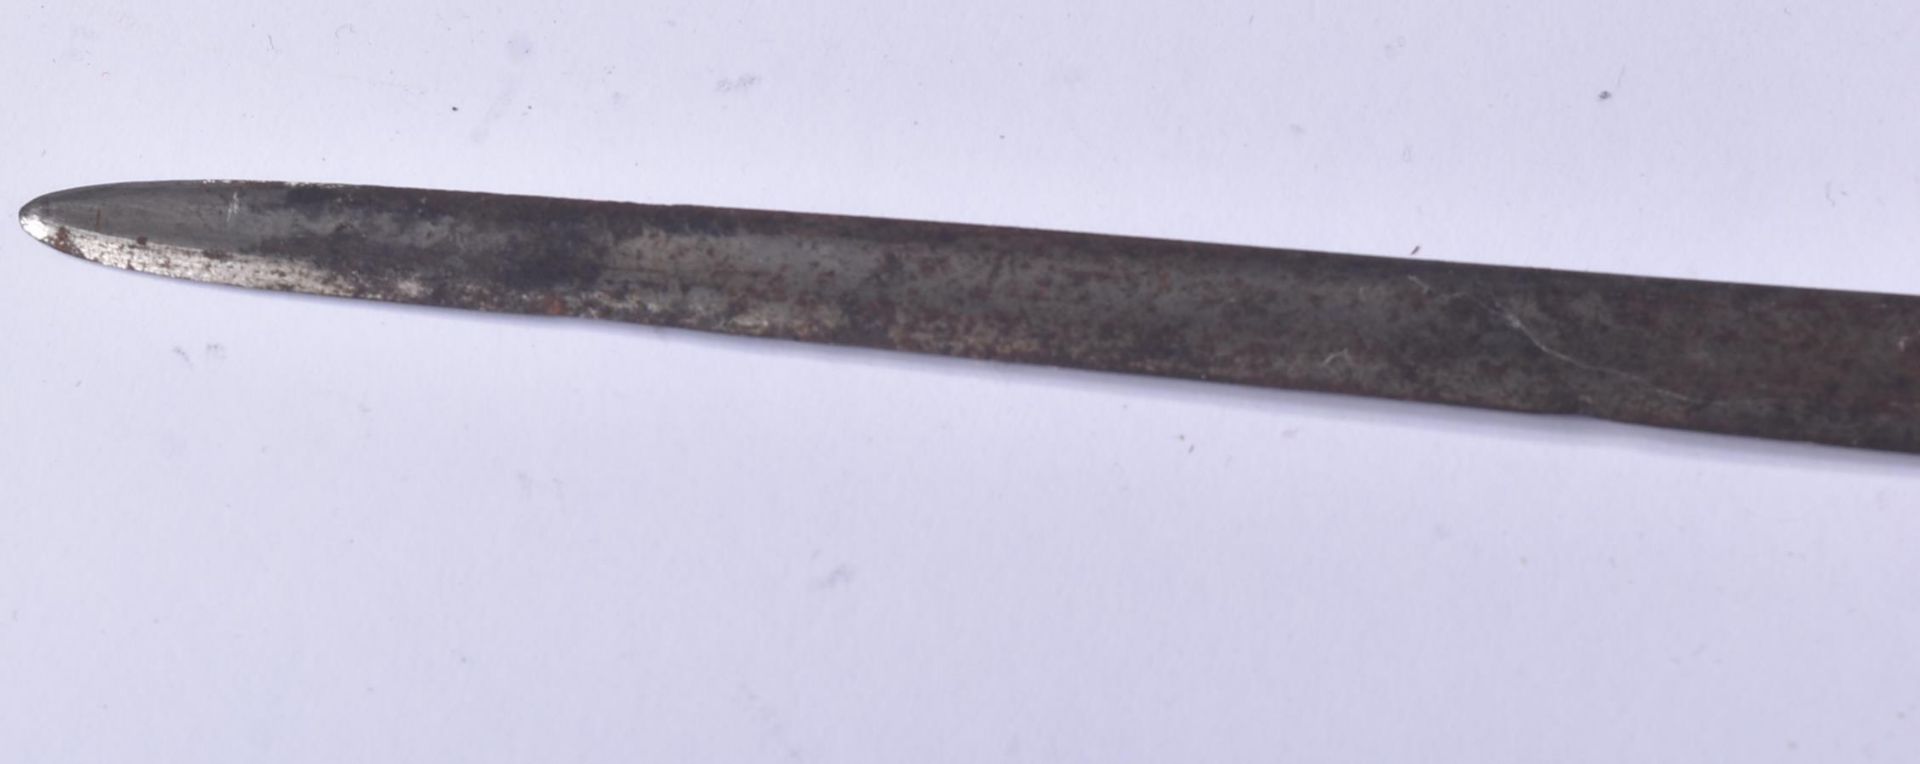 EARLY 19TH CENTURY INFANTRY OFFICERS SWORD / SPADROON - Image 10 of 16